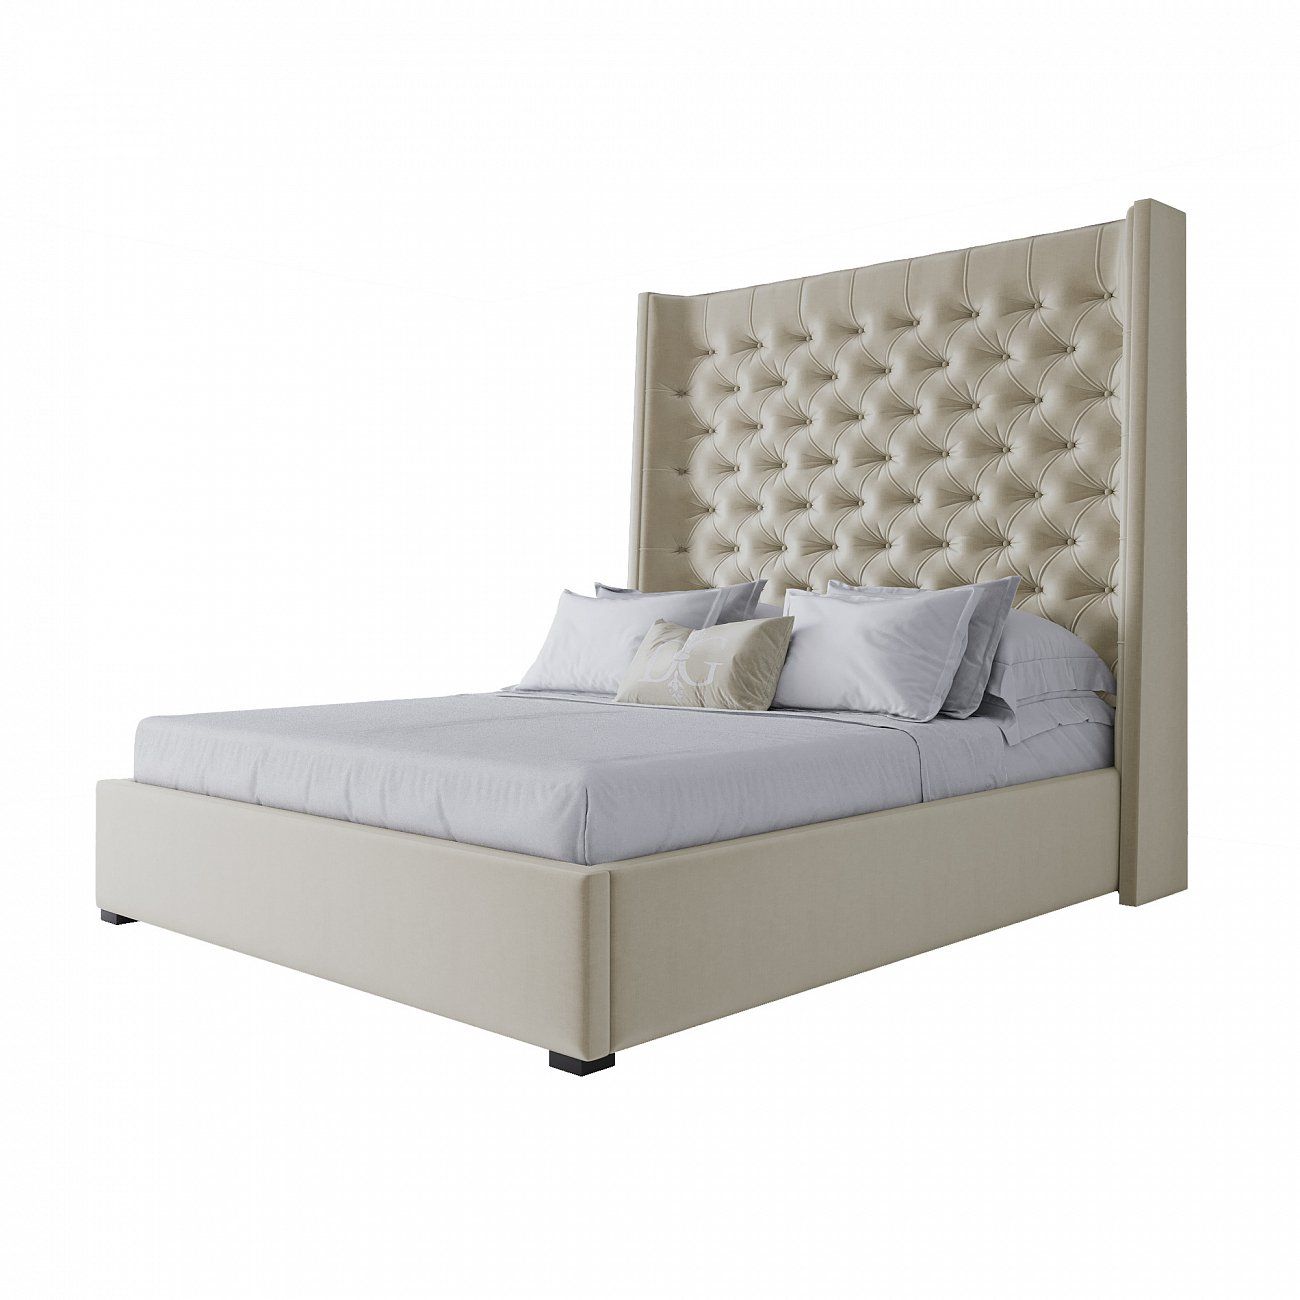 Double bed with upholstered headboard 160x200 cm beige Jackie King